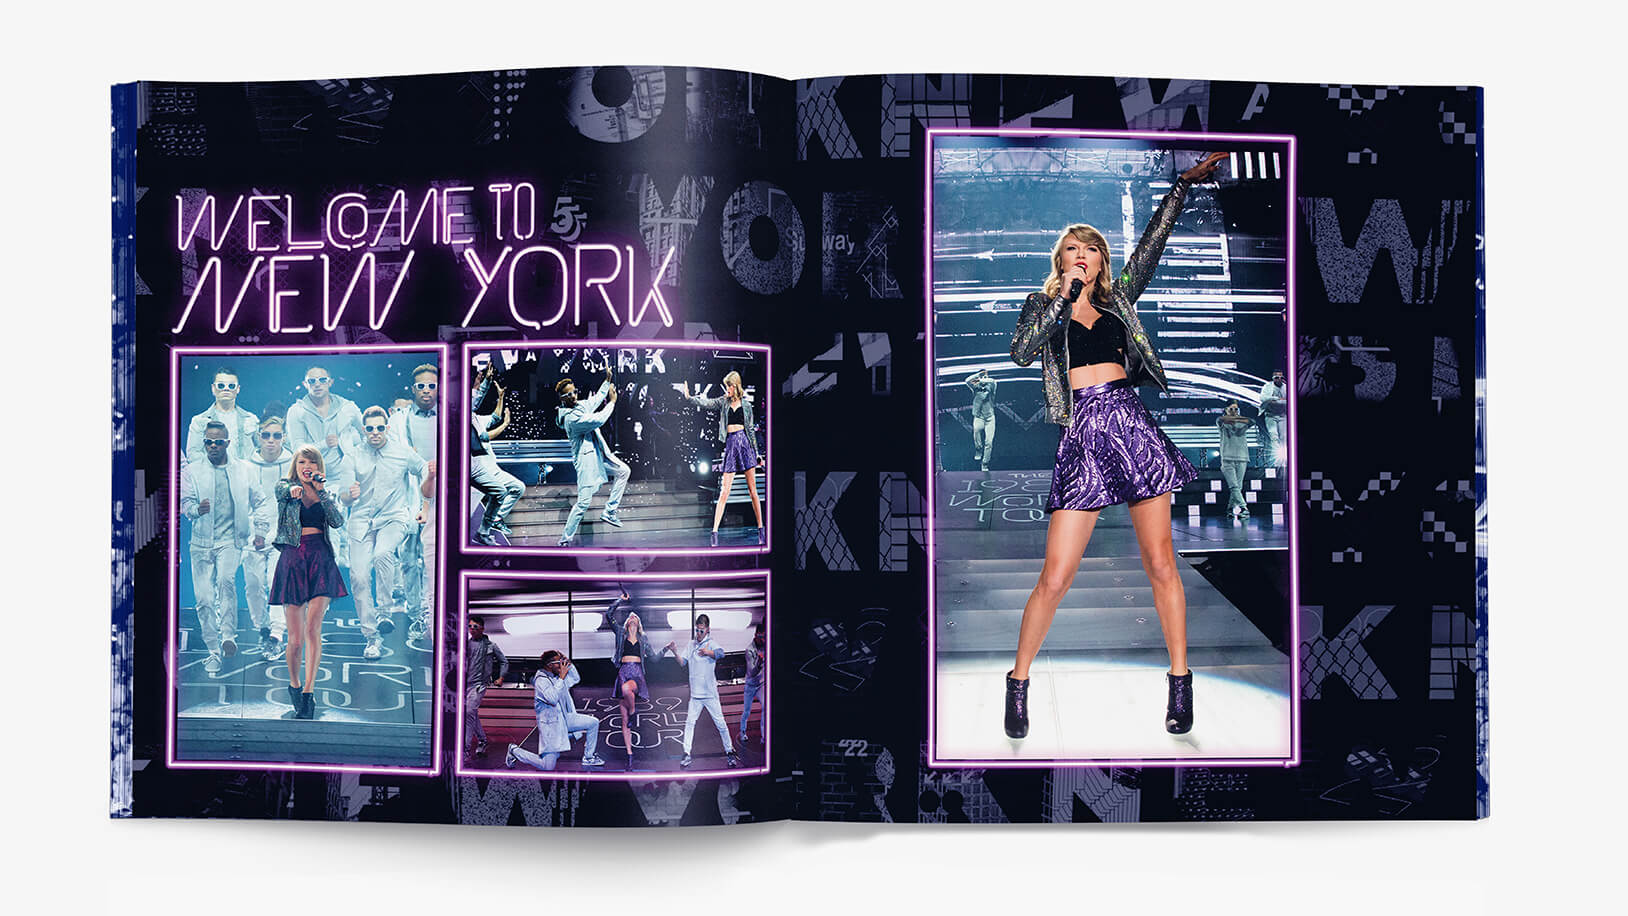 Publication spread design of Welcome To New York featuring tour images and neon typography in The 1989 World Tour Book for Taylor Swift